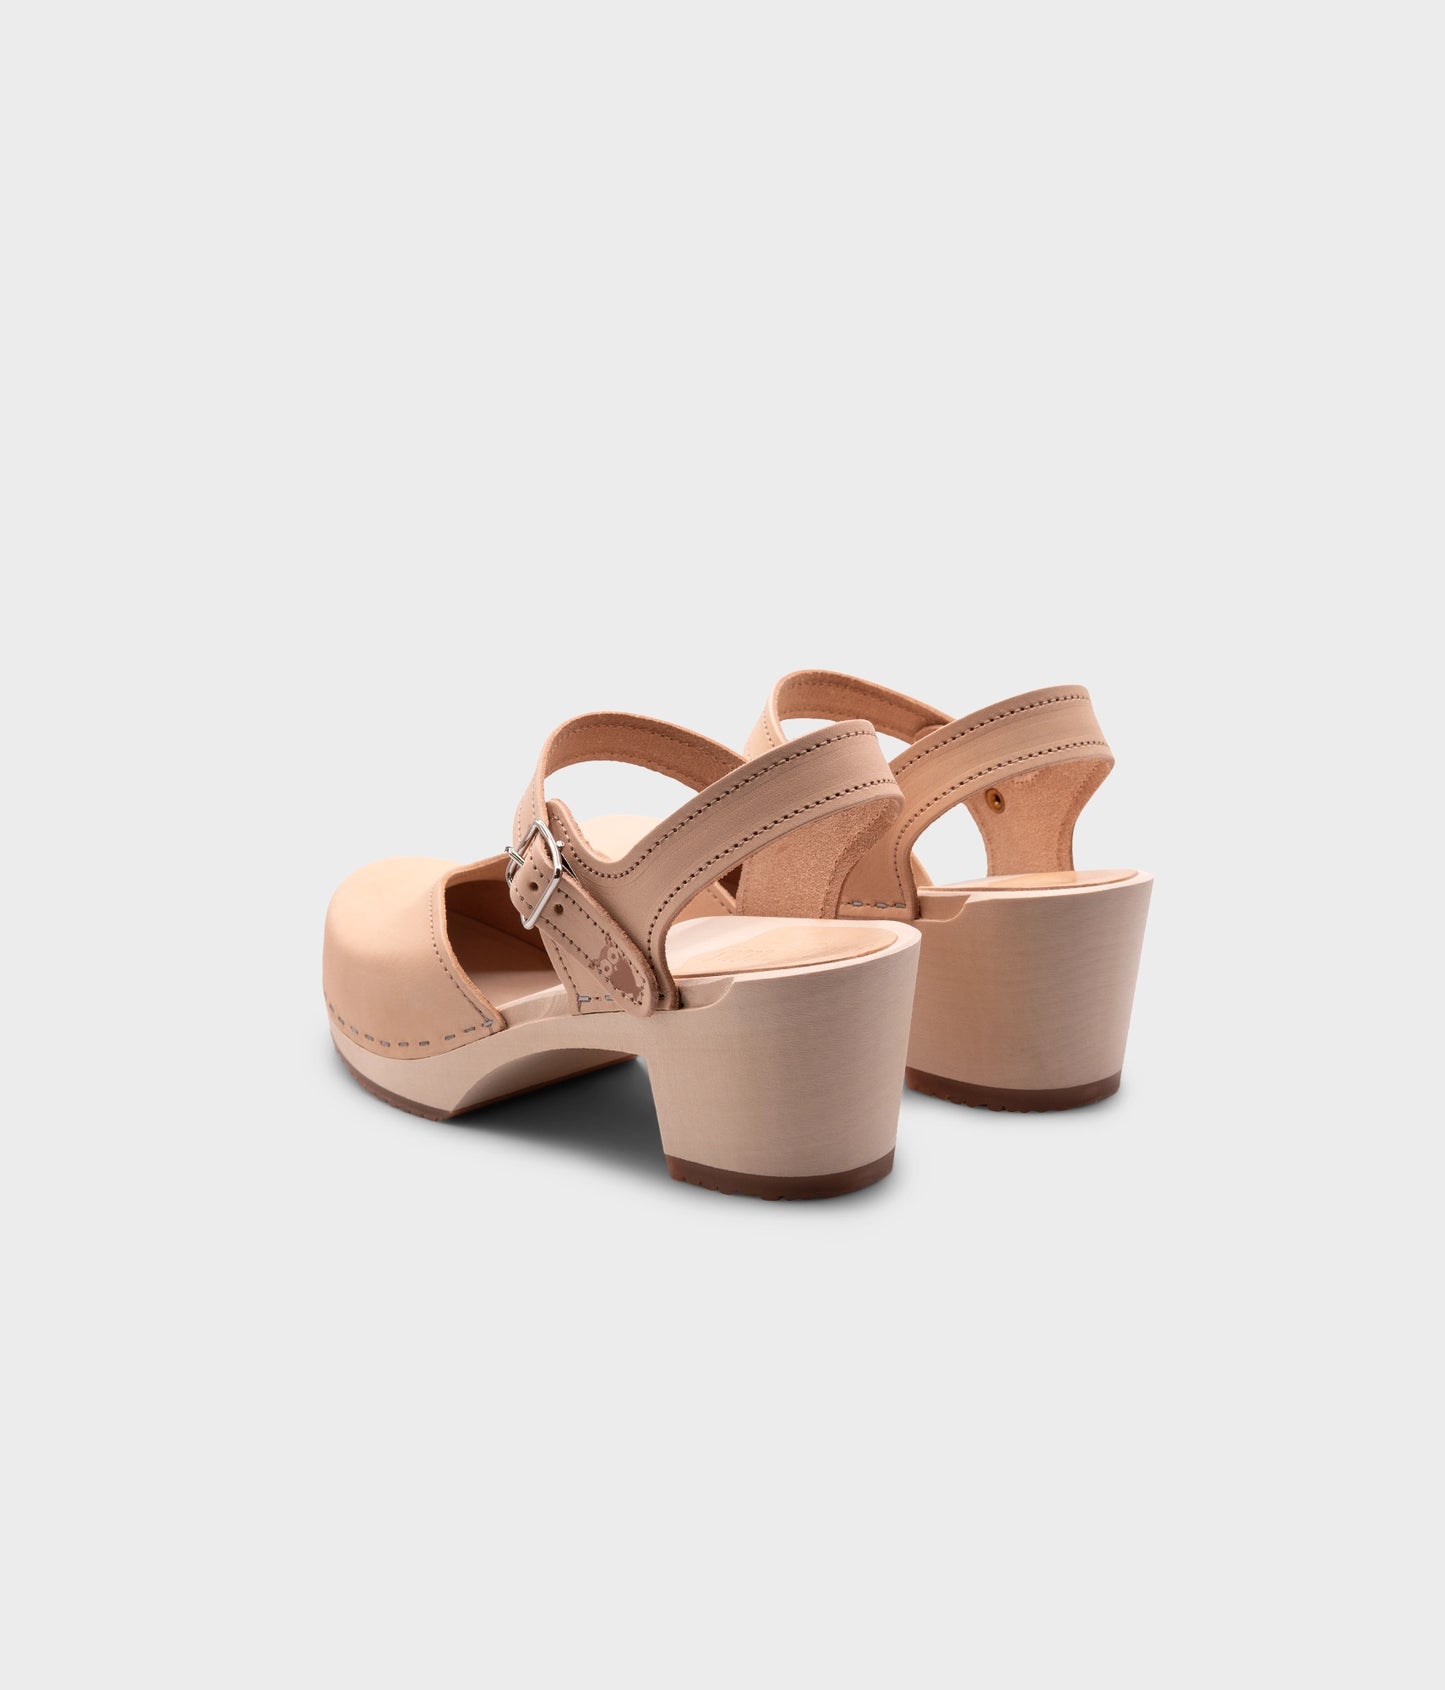 high heeled closed-toe clog sandal in ecru beige vegetable tanned leather stapled on a light wooden base